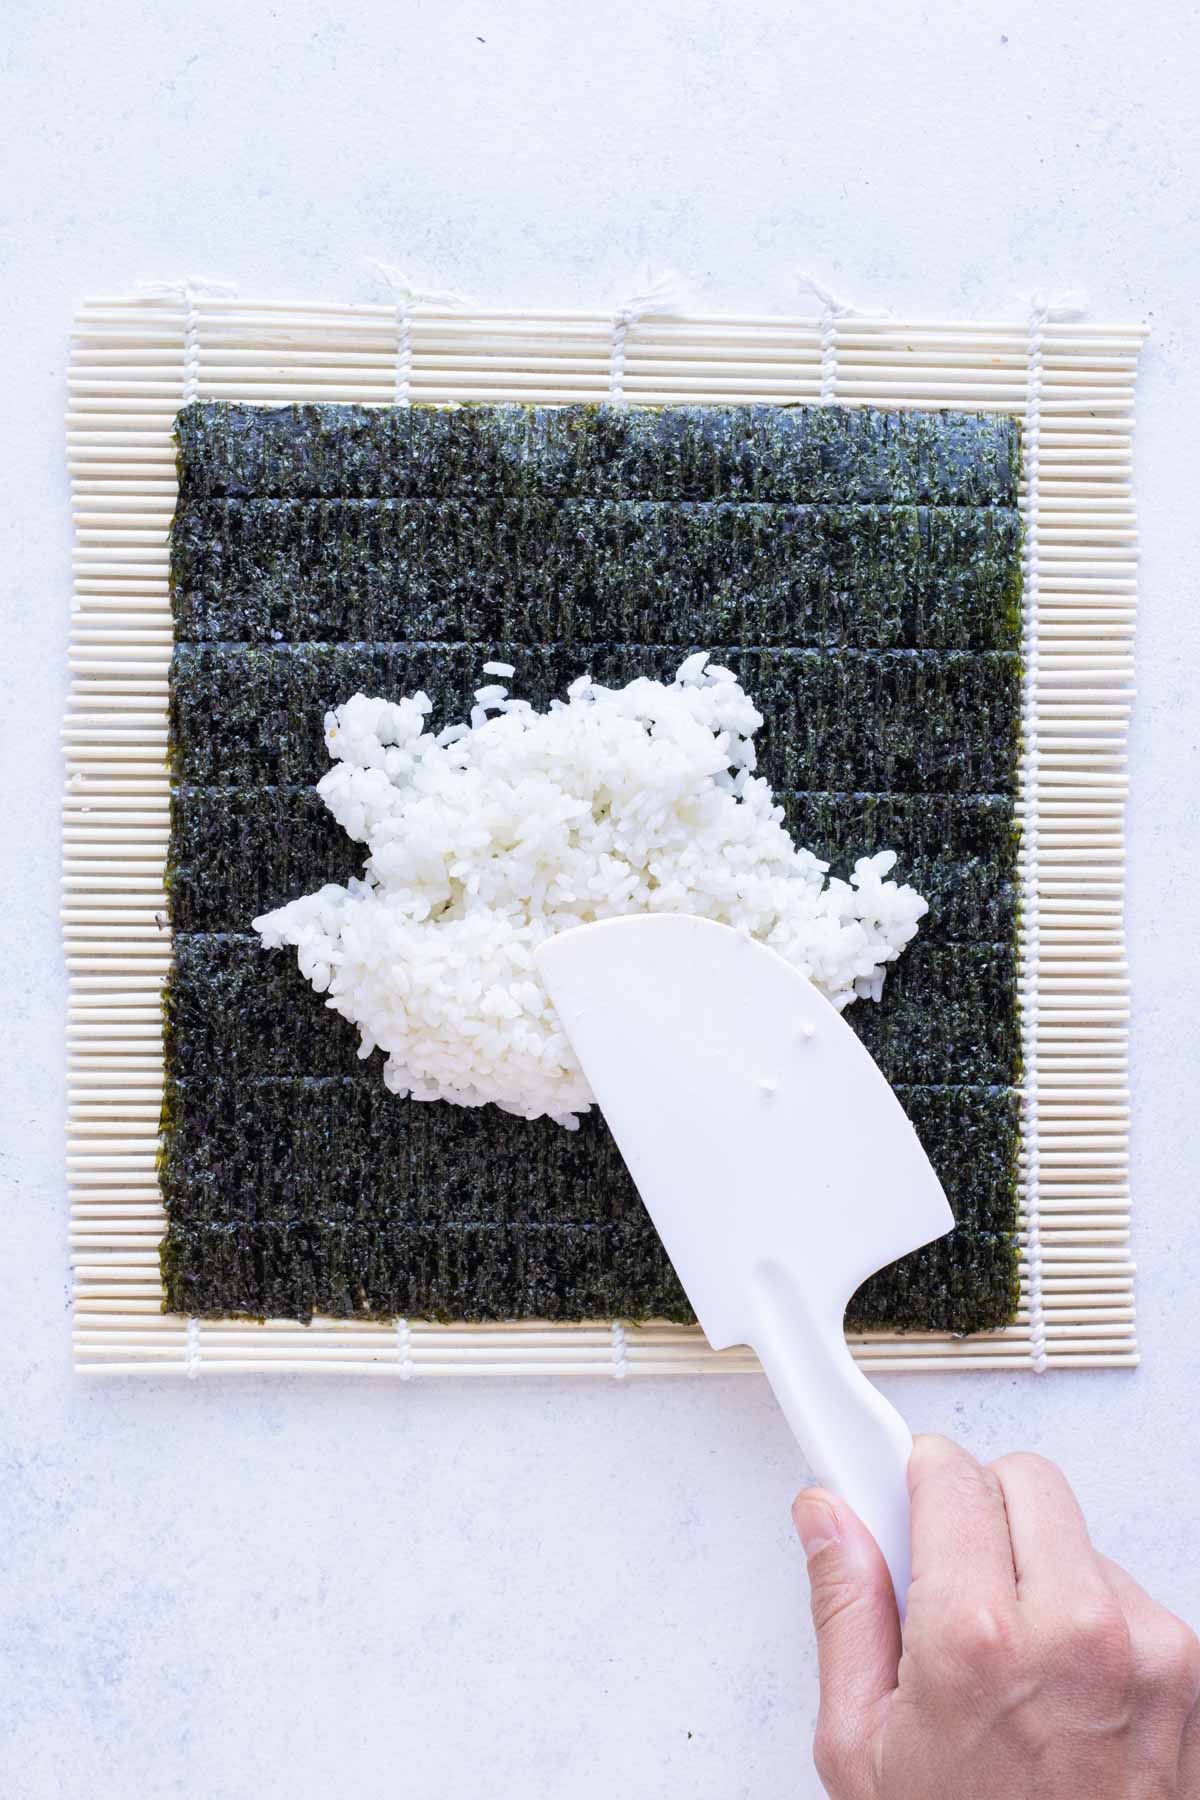 Spatula is used to spread the rice on the nori.